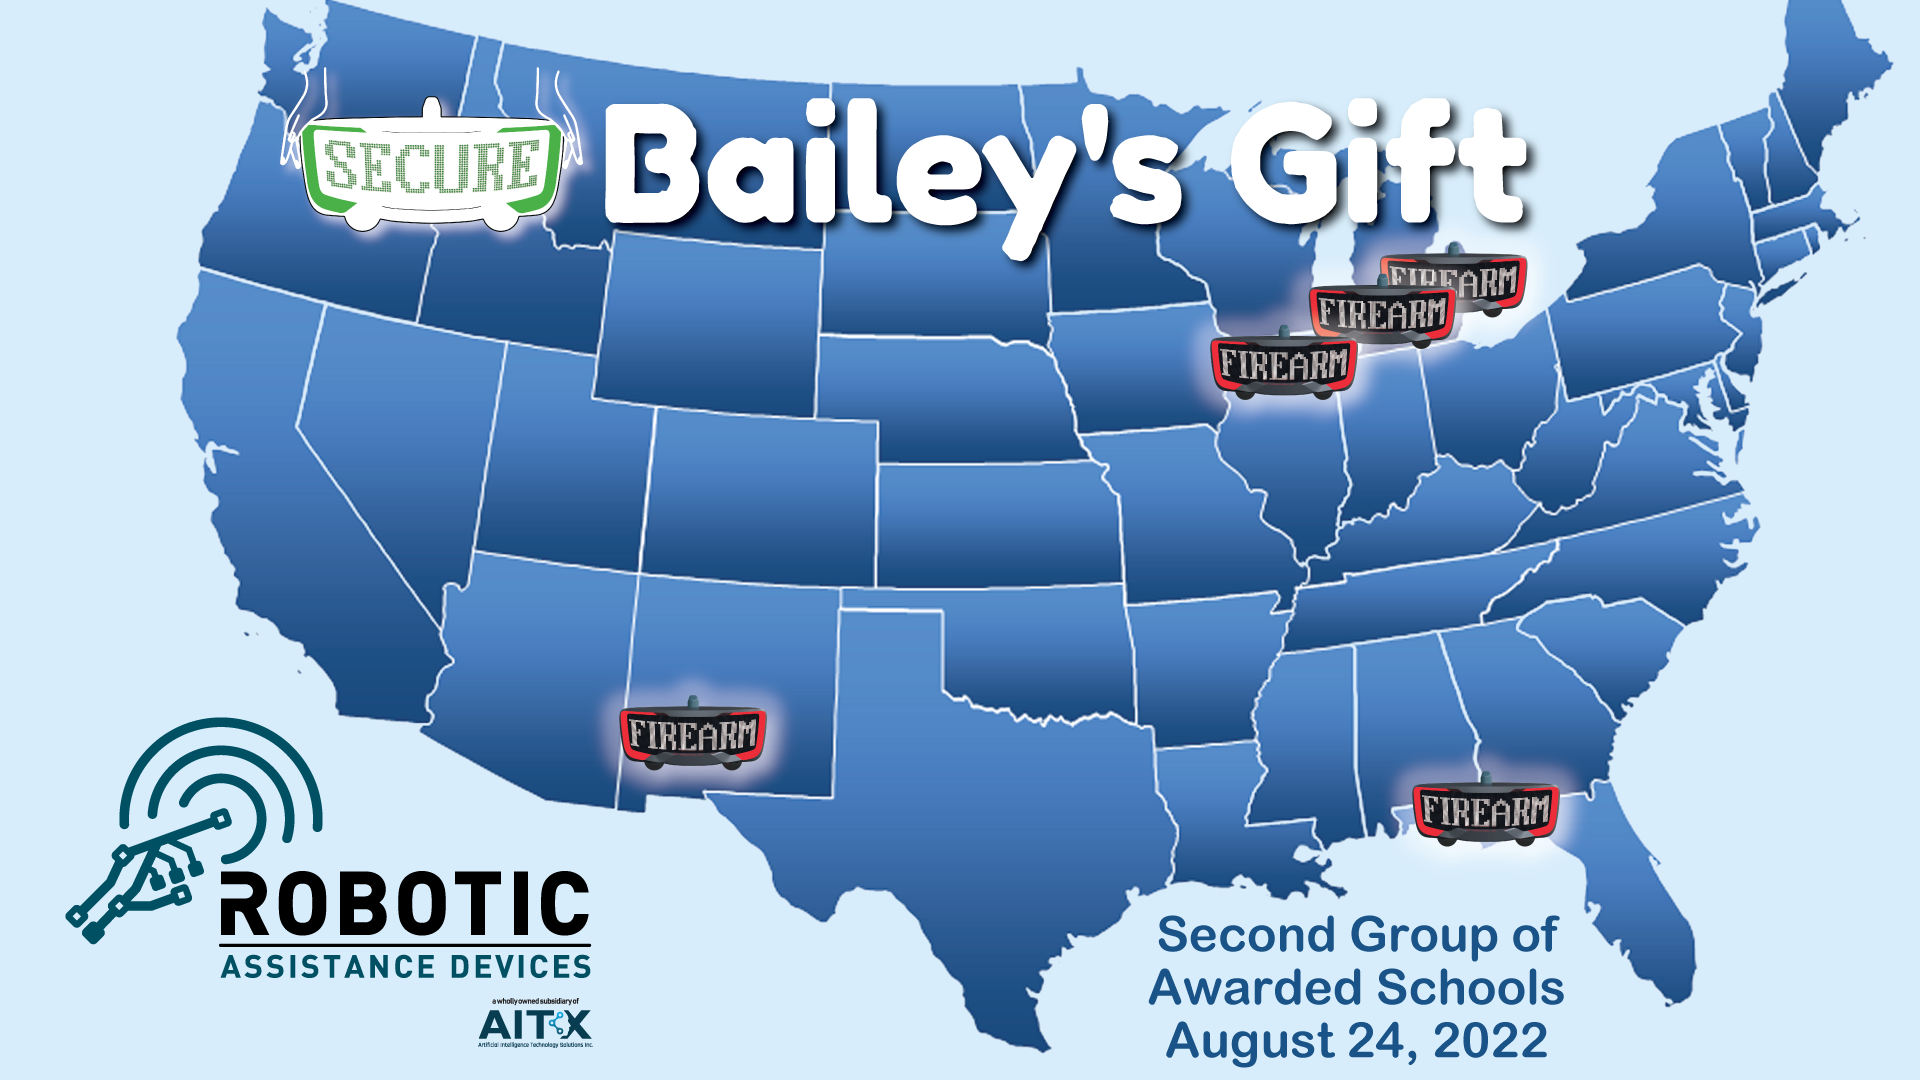 rad-baileys-gift-second-round-selected-5-us-map-1920x1080